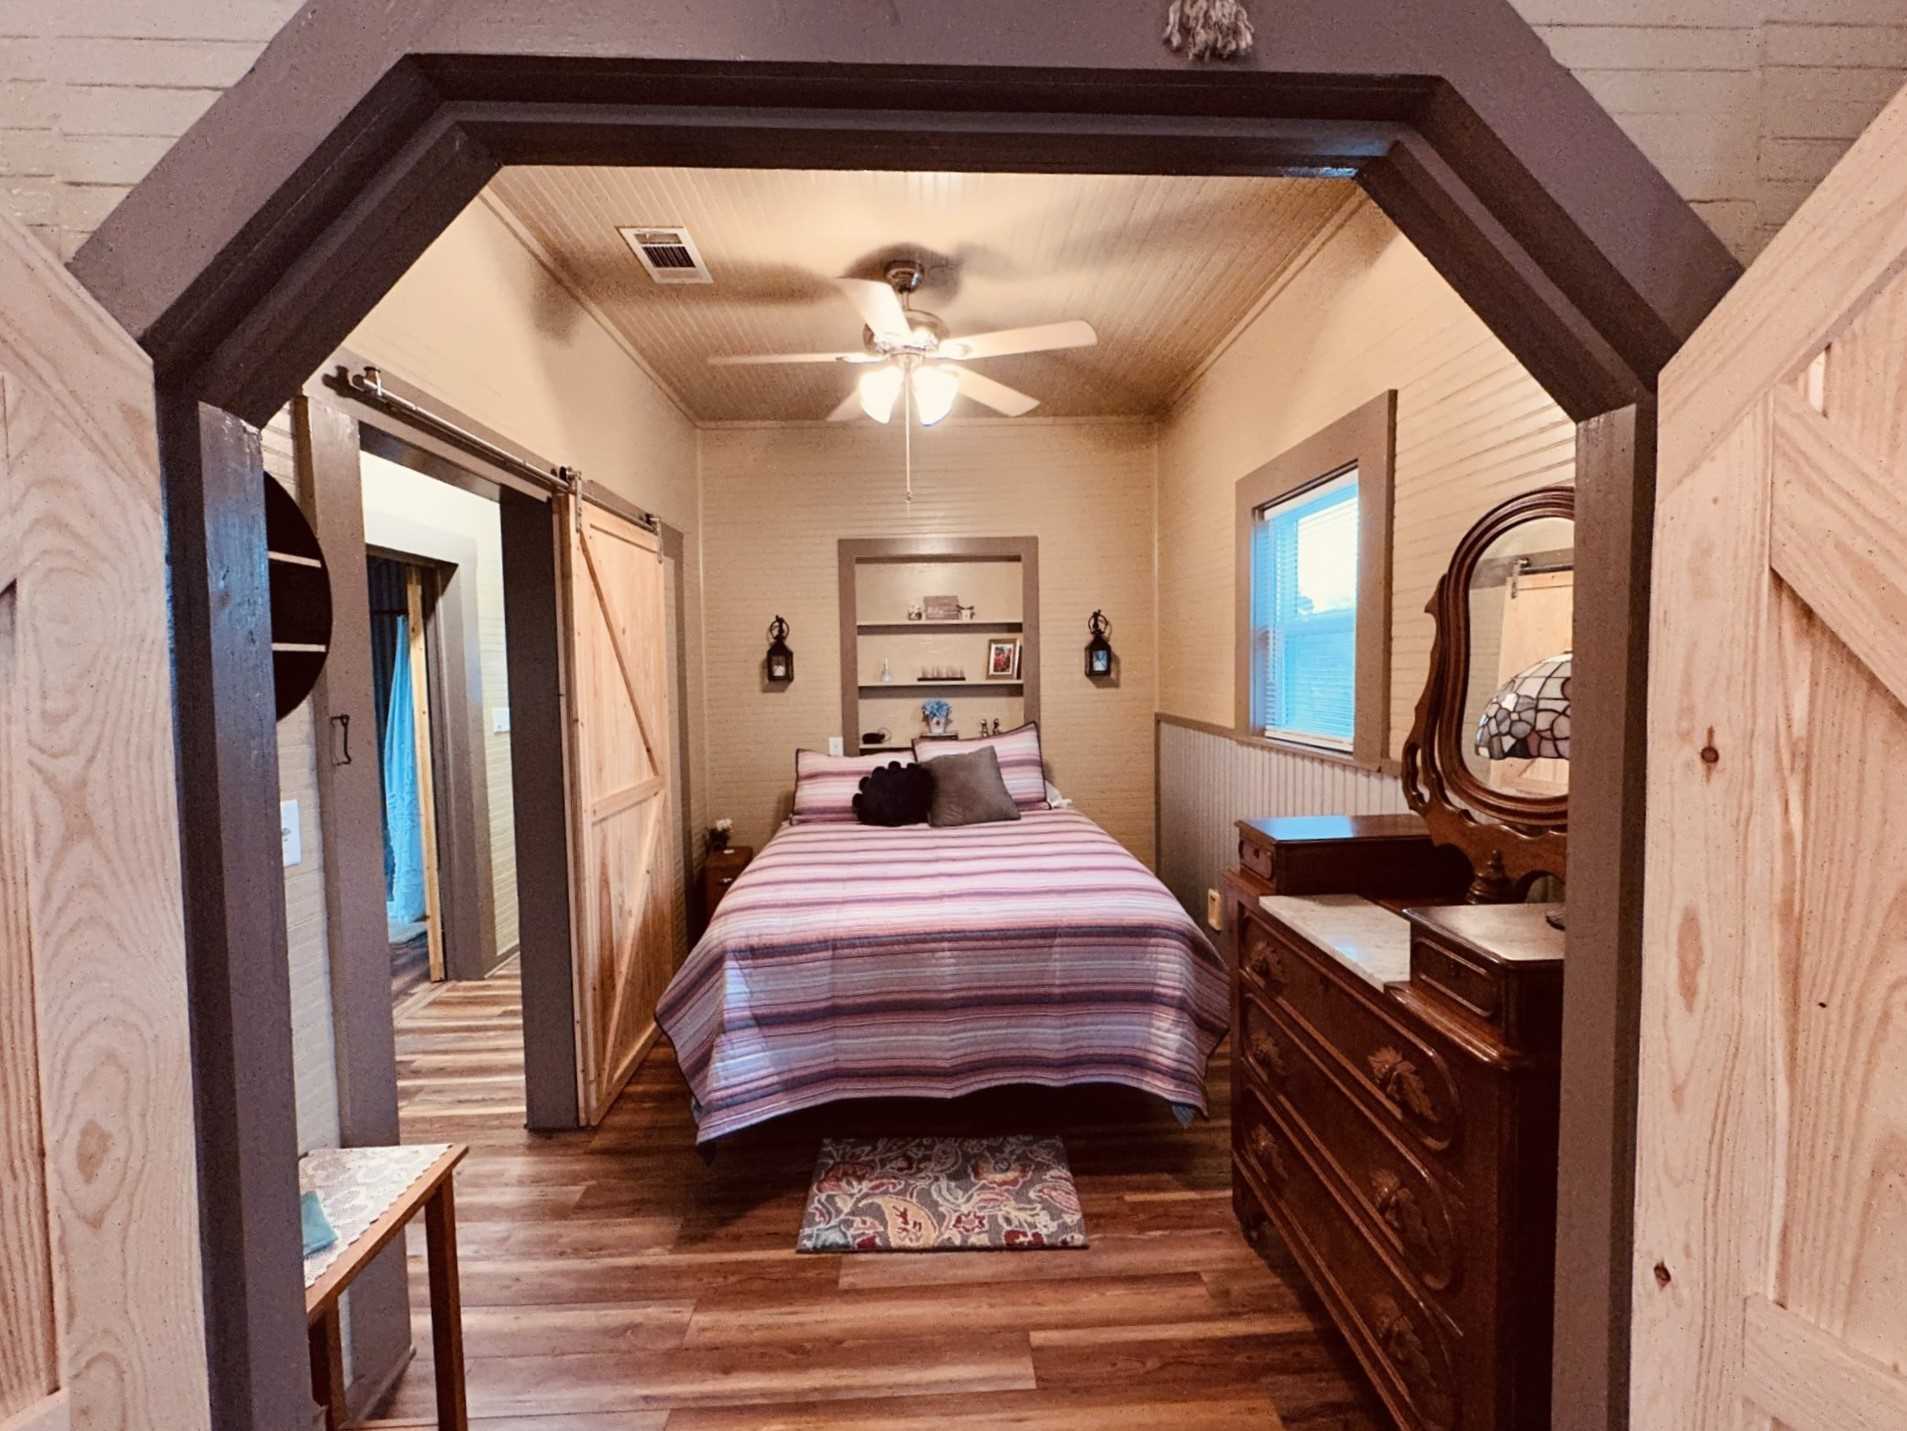                                                 The bedroom at the Texas Blue Apple Cottage features a plush queen-sized bed, storage, and cozy country comfort!